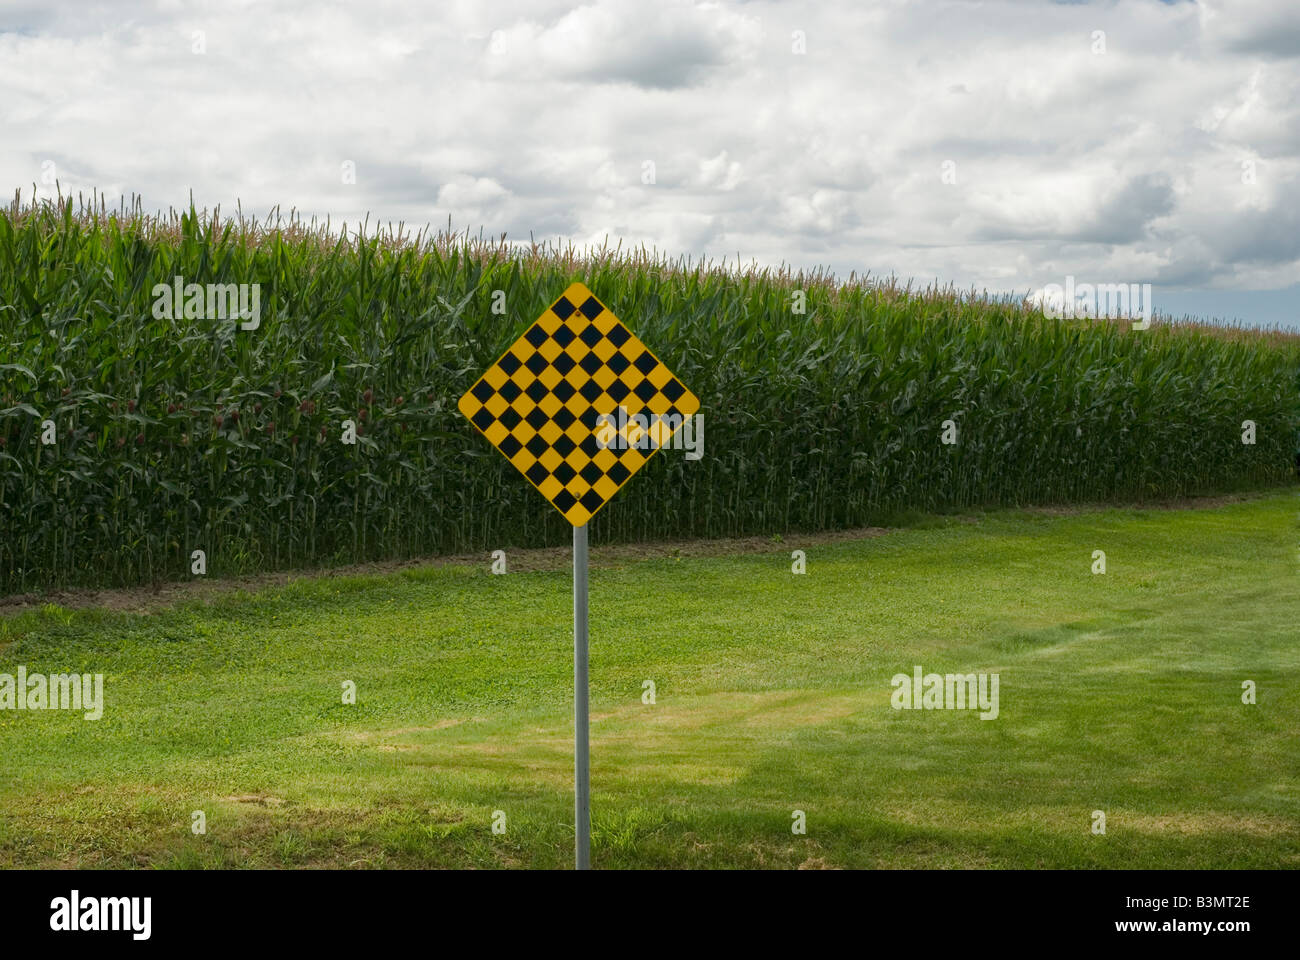 Termination of Road or End of Road sign with corn field in the background Stock Photo